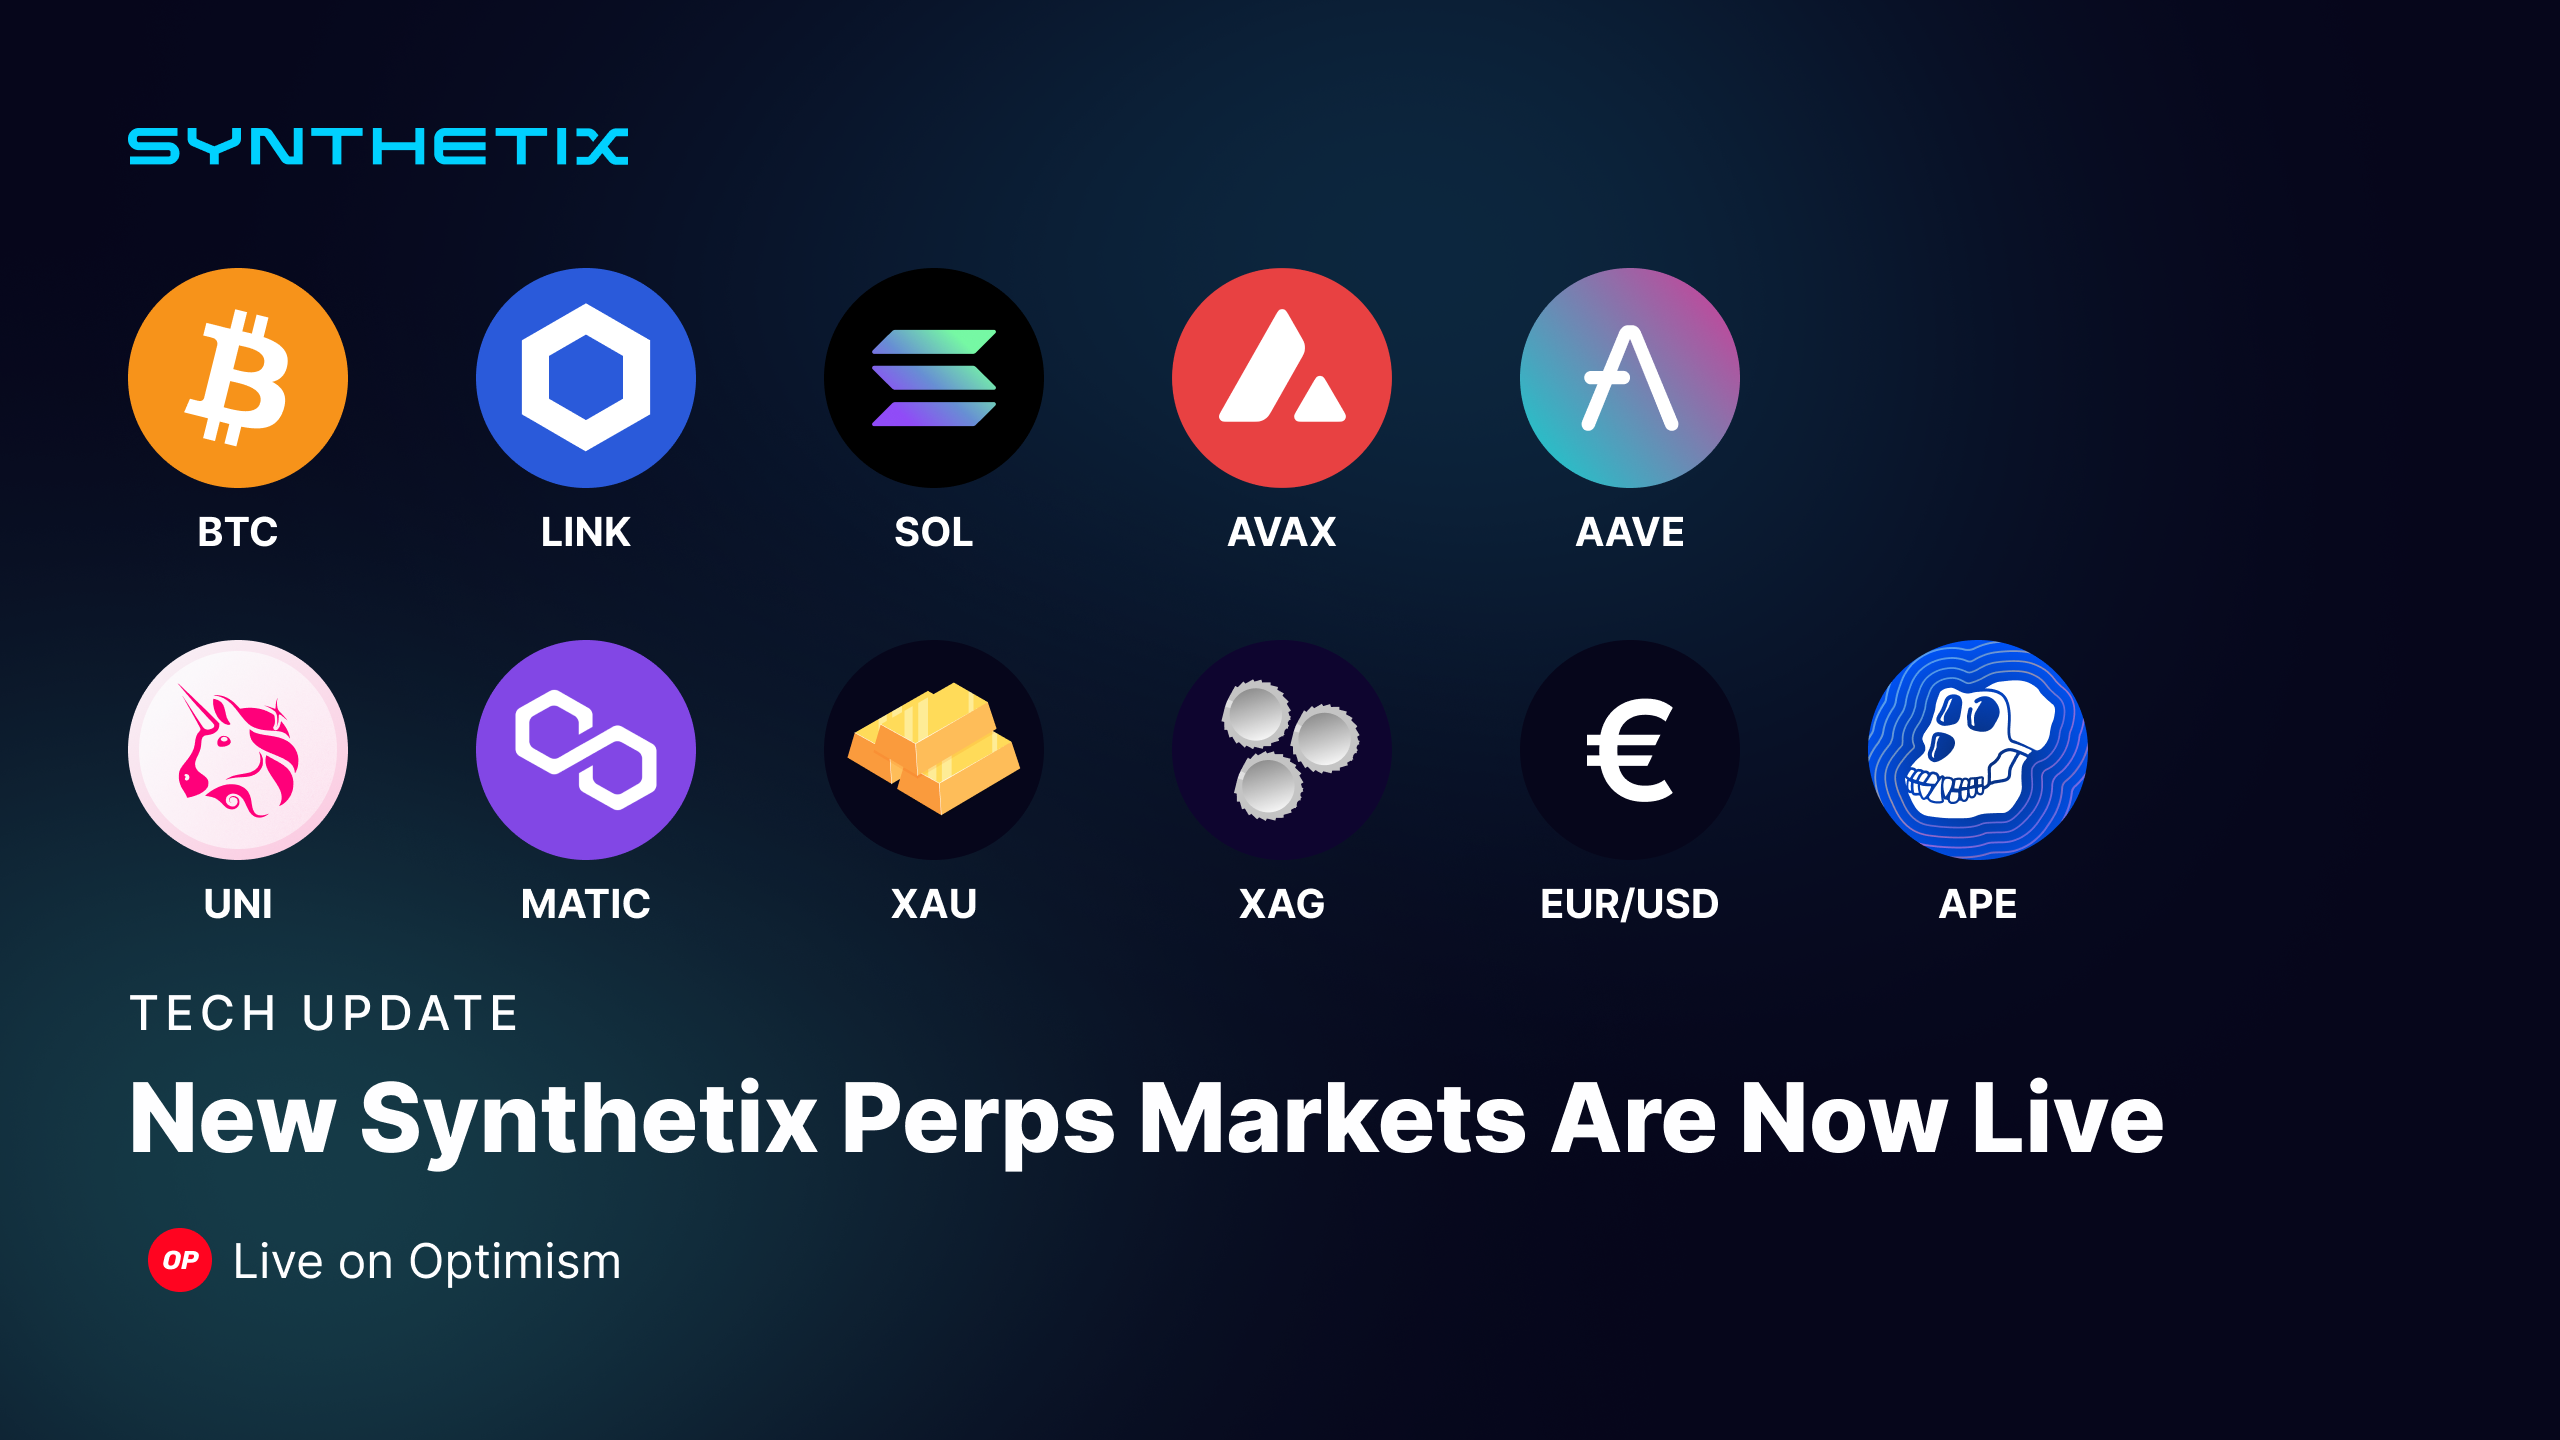 22 New Synthetix Perps Markets are now live